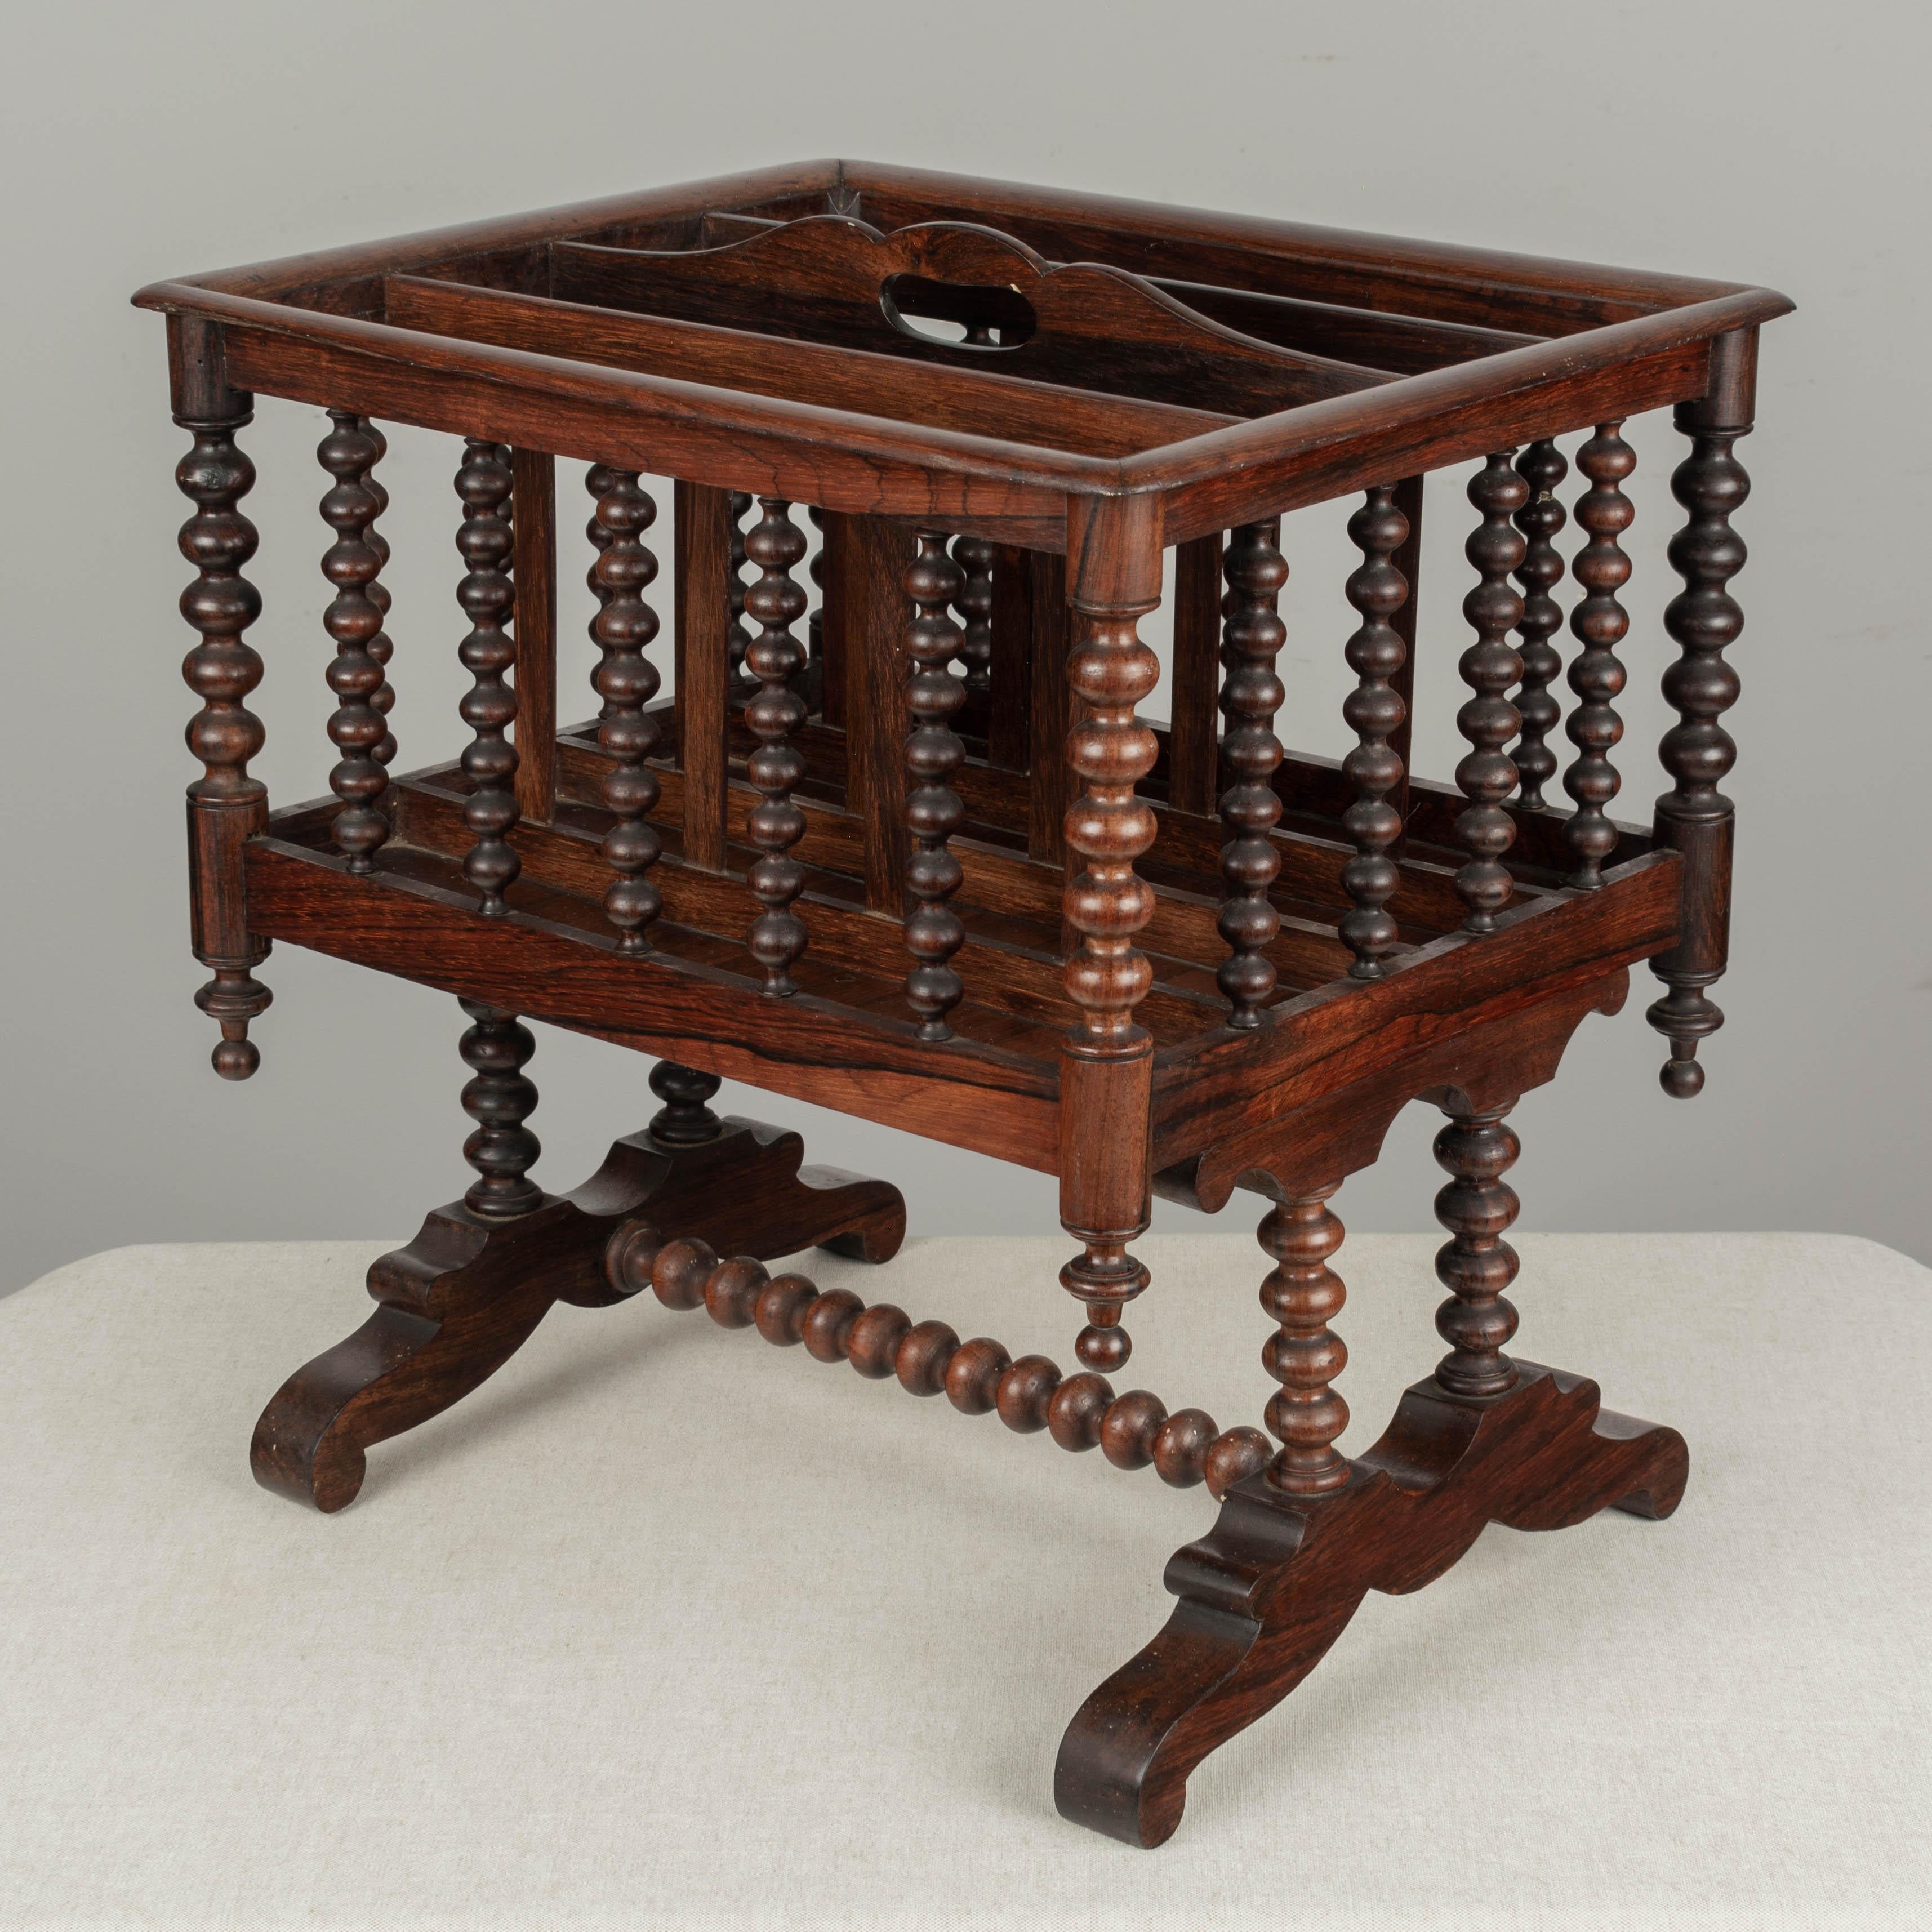 A fine 19th century English Regency style rosewood four-section canterbury for sheet music, or magazine rack. Highly decorative turned spindle frame with carrying handle, raised on legs with spindle stretcher.